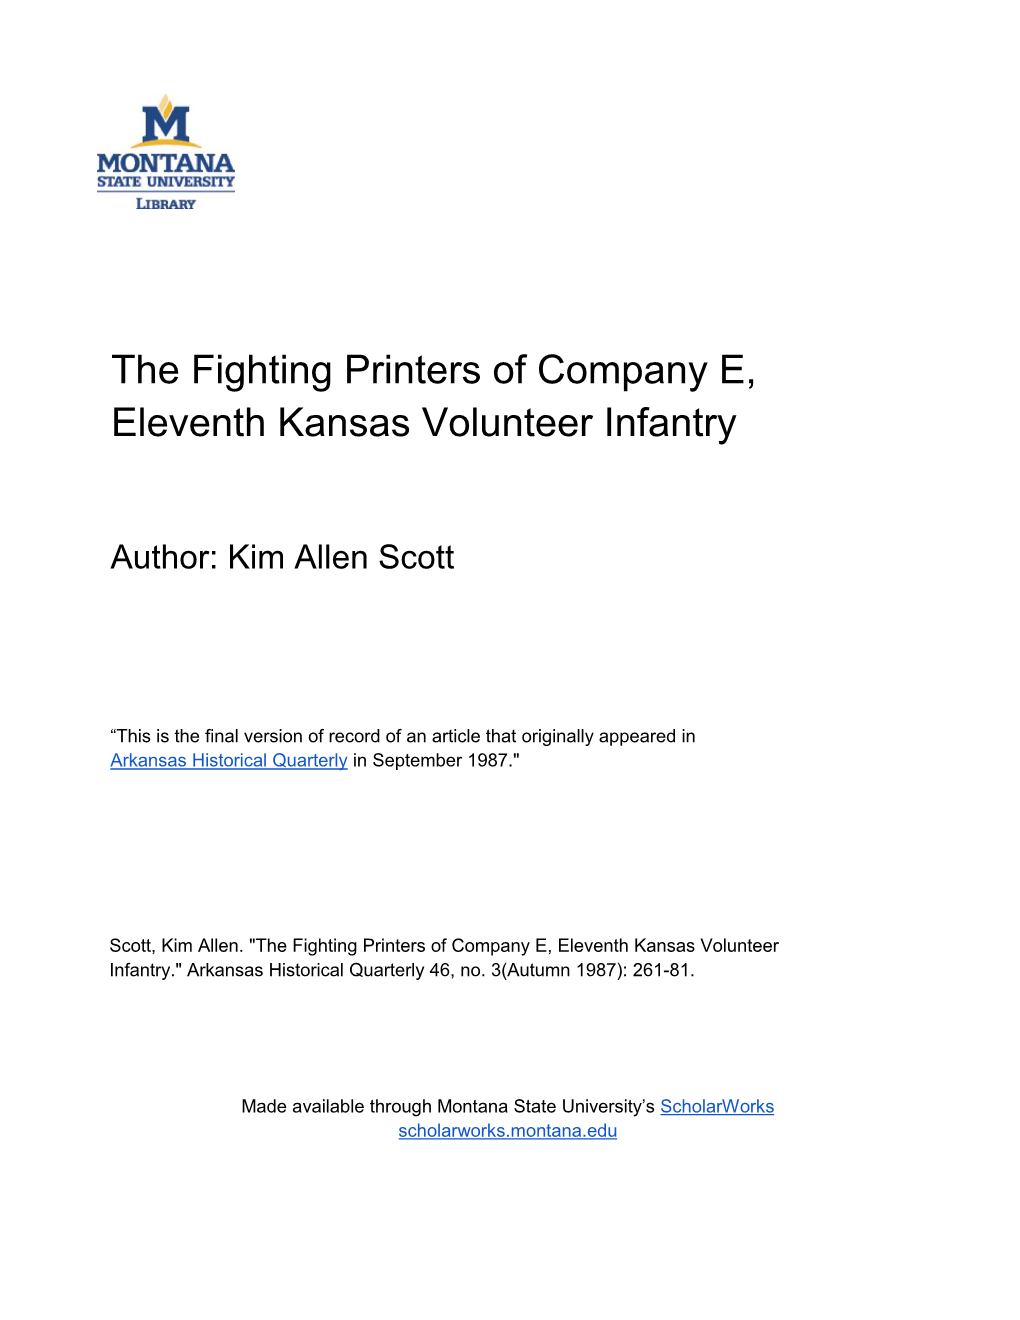 The Fighting Printers of Company E, Eleventh Kansas Volunteer Infantry